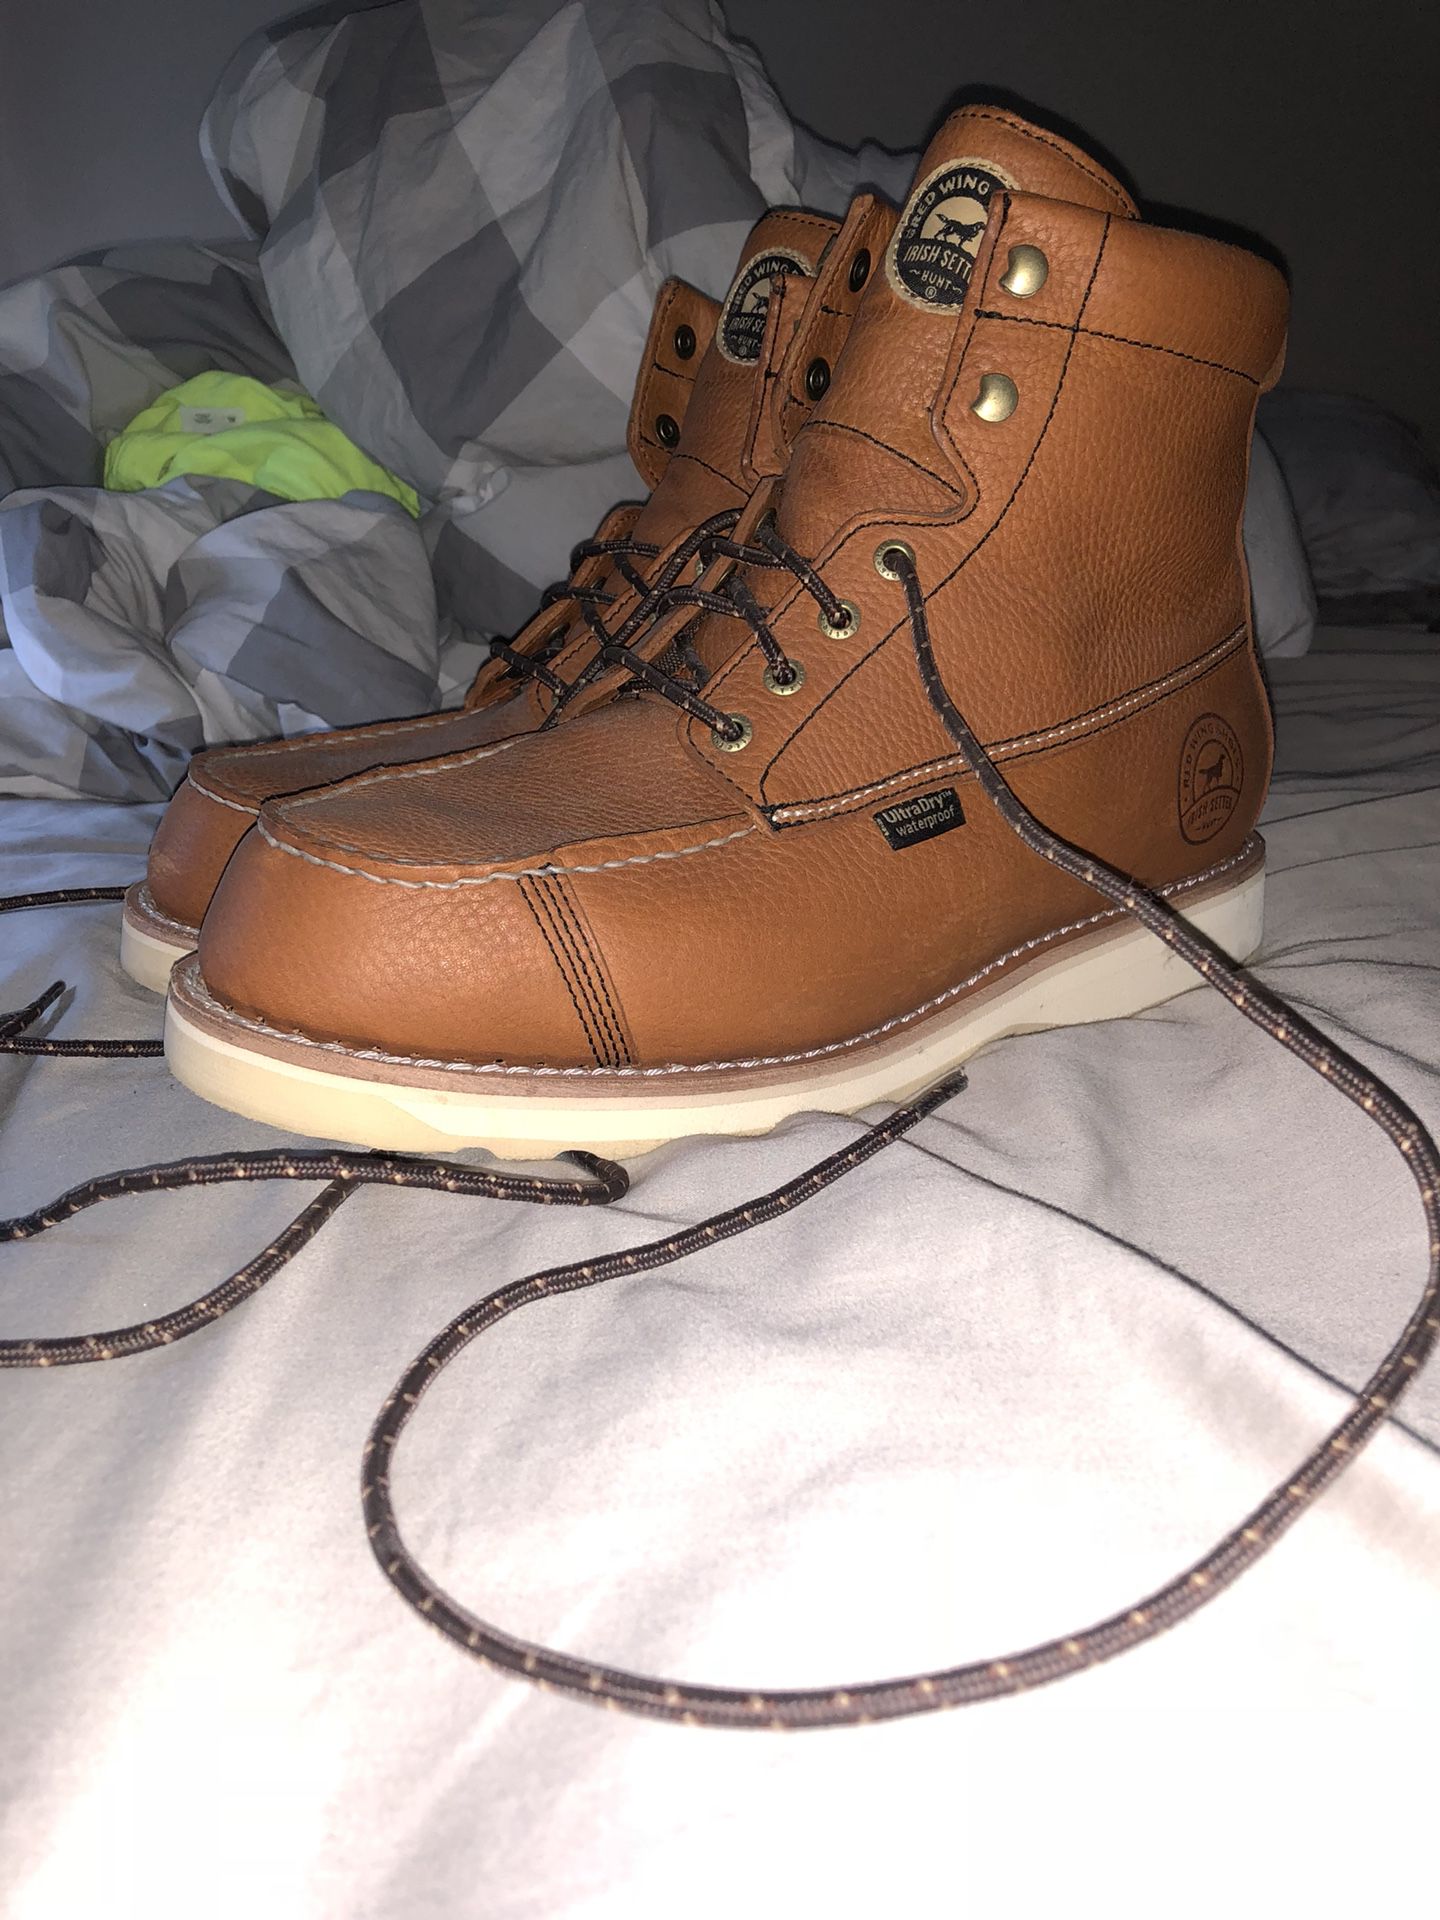 Irish setter red wing leather work boots